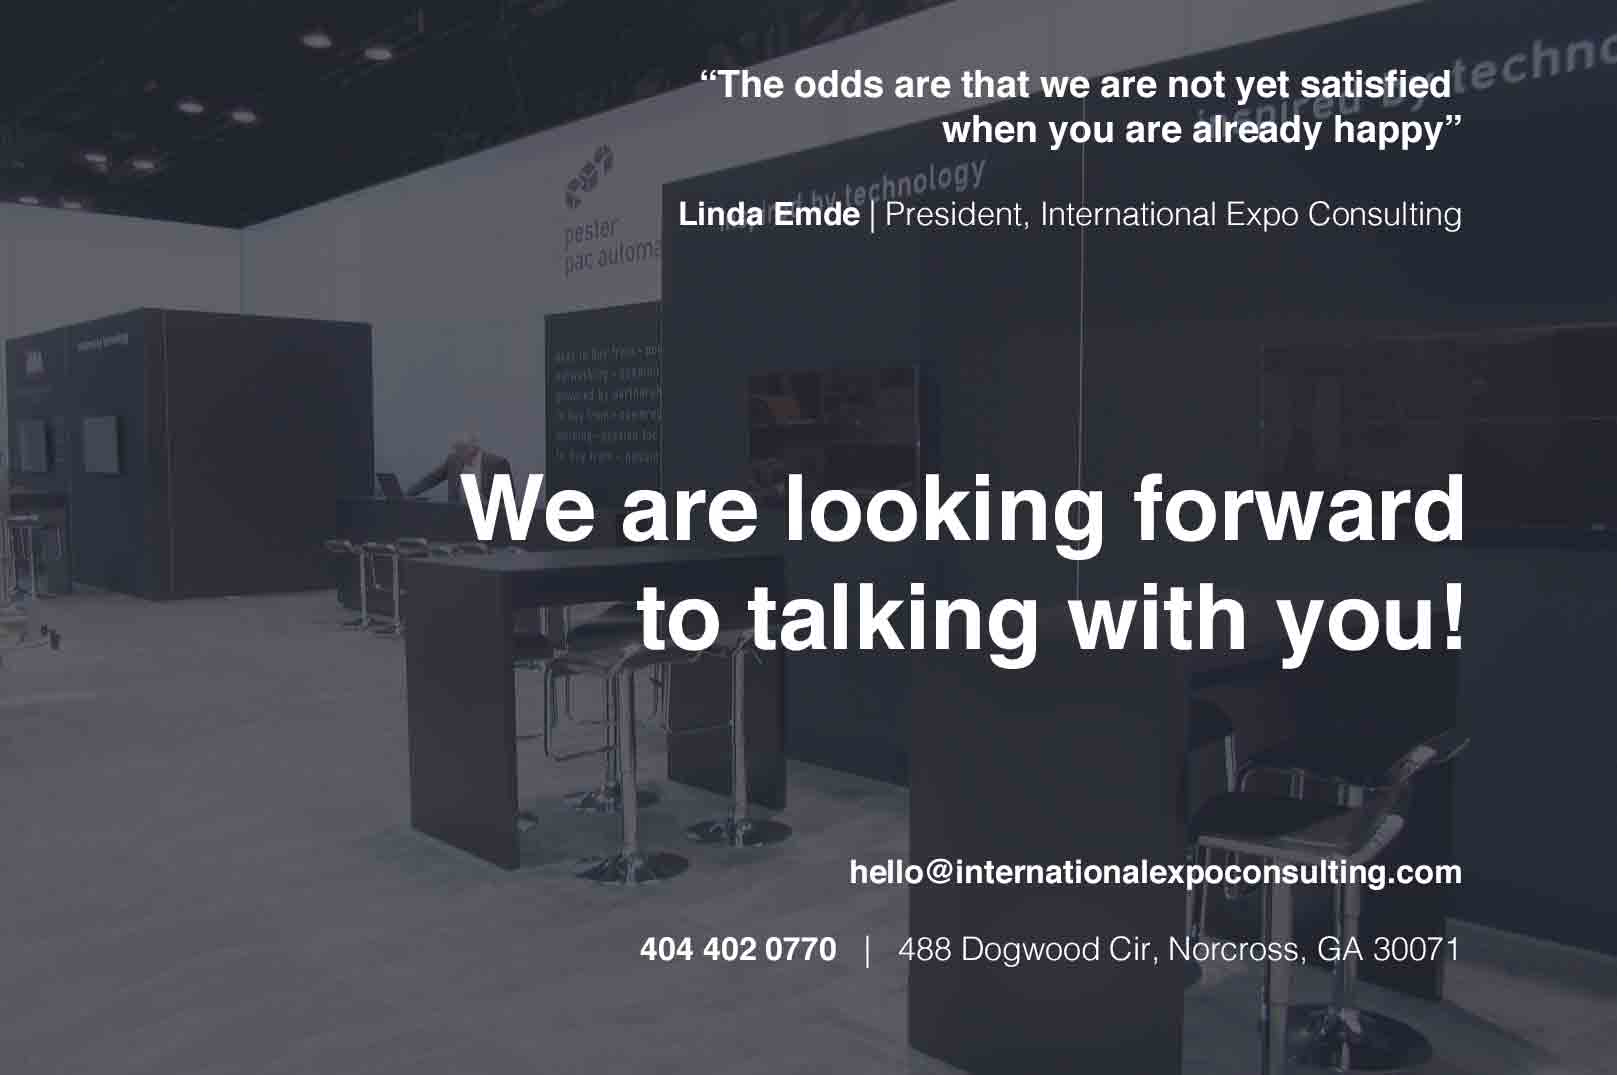 “The odds are that we are not yet satisfied  when you are already happy”  Linda Emde | President, International Expo Consulting. We are looking forward to talking to you!